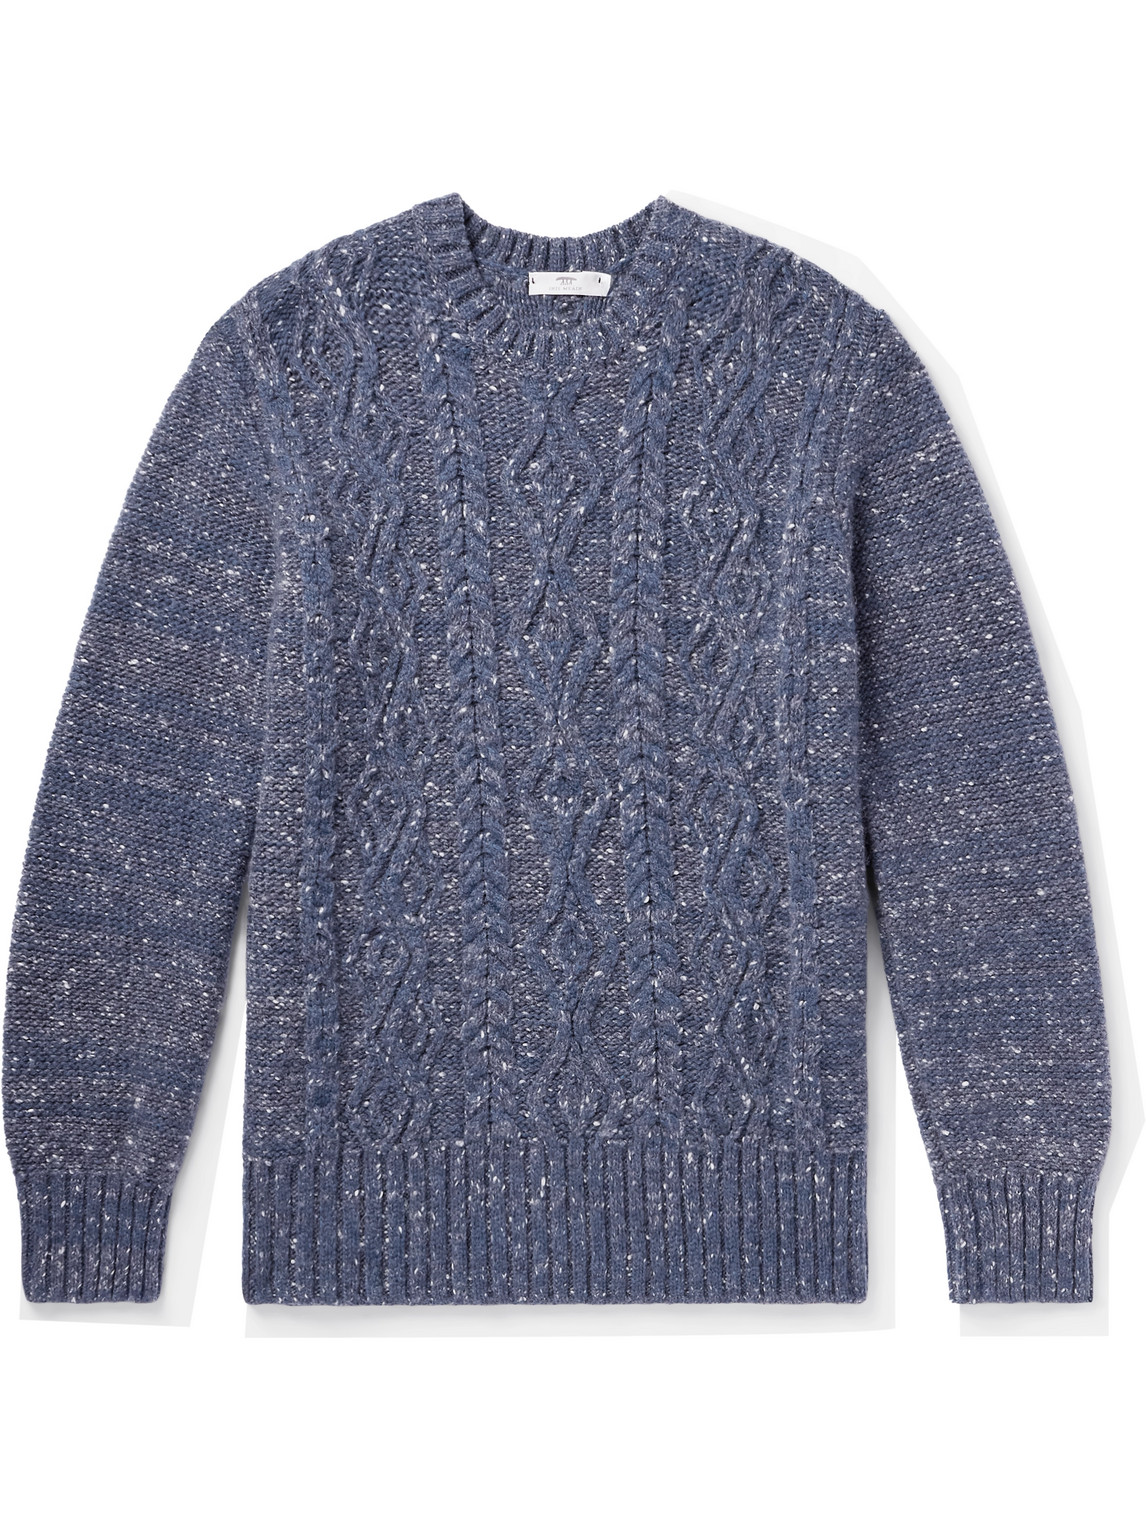 Inis Meain Aran Cable-knit Cashmere Jumper In Blue